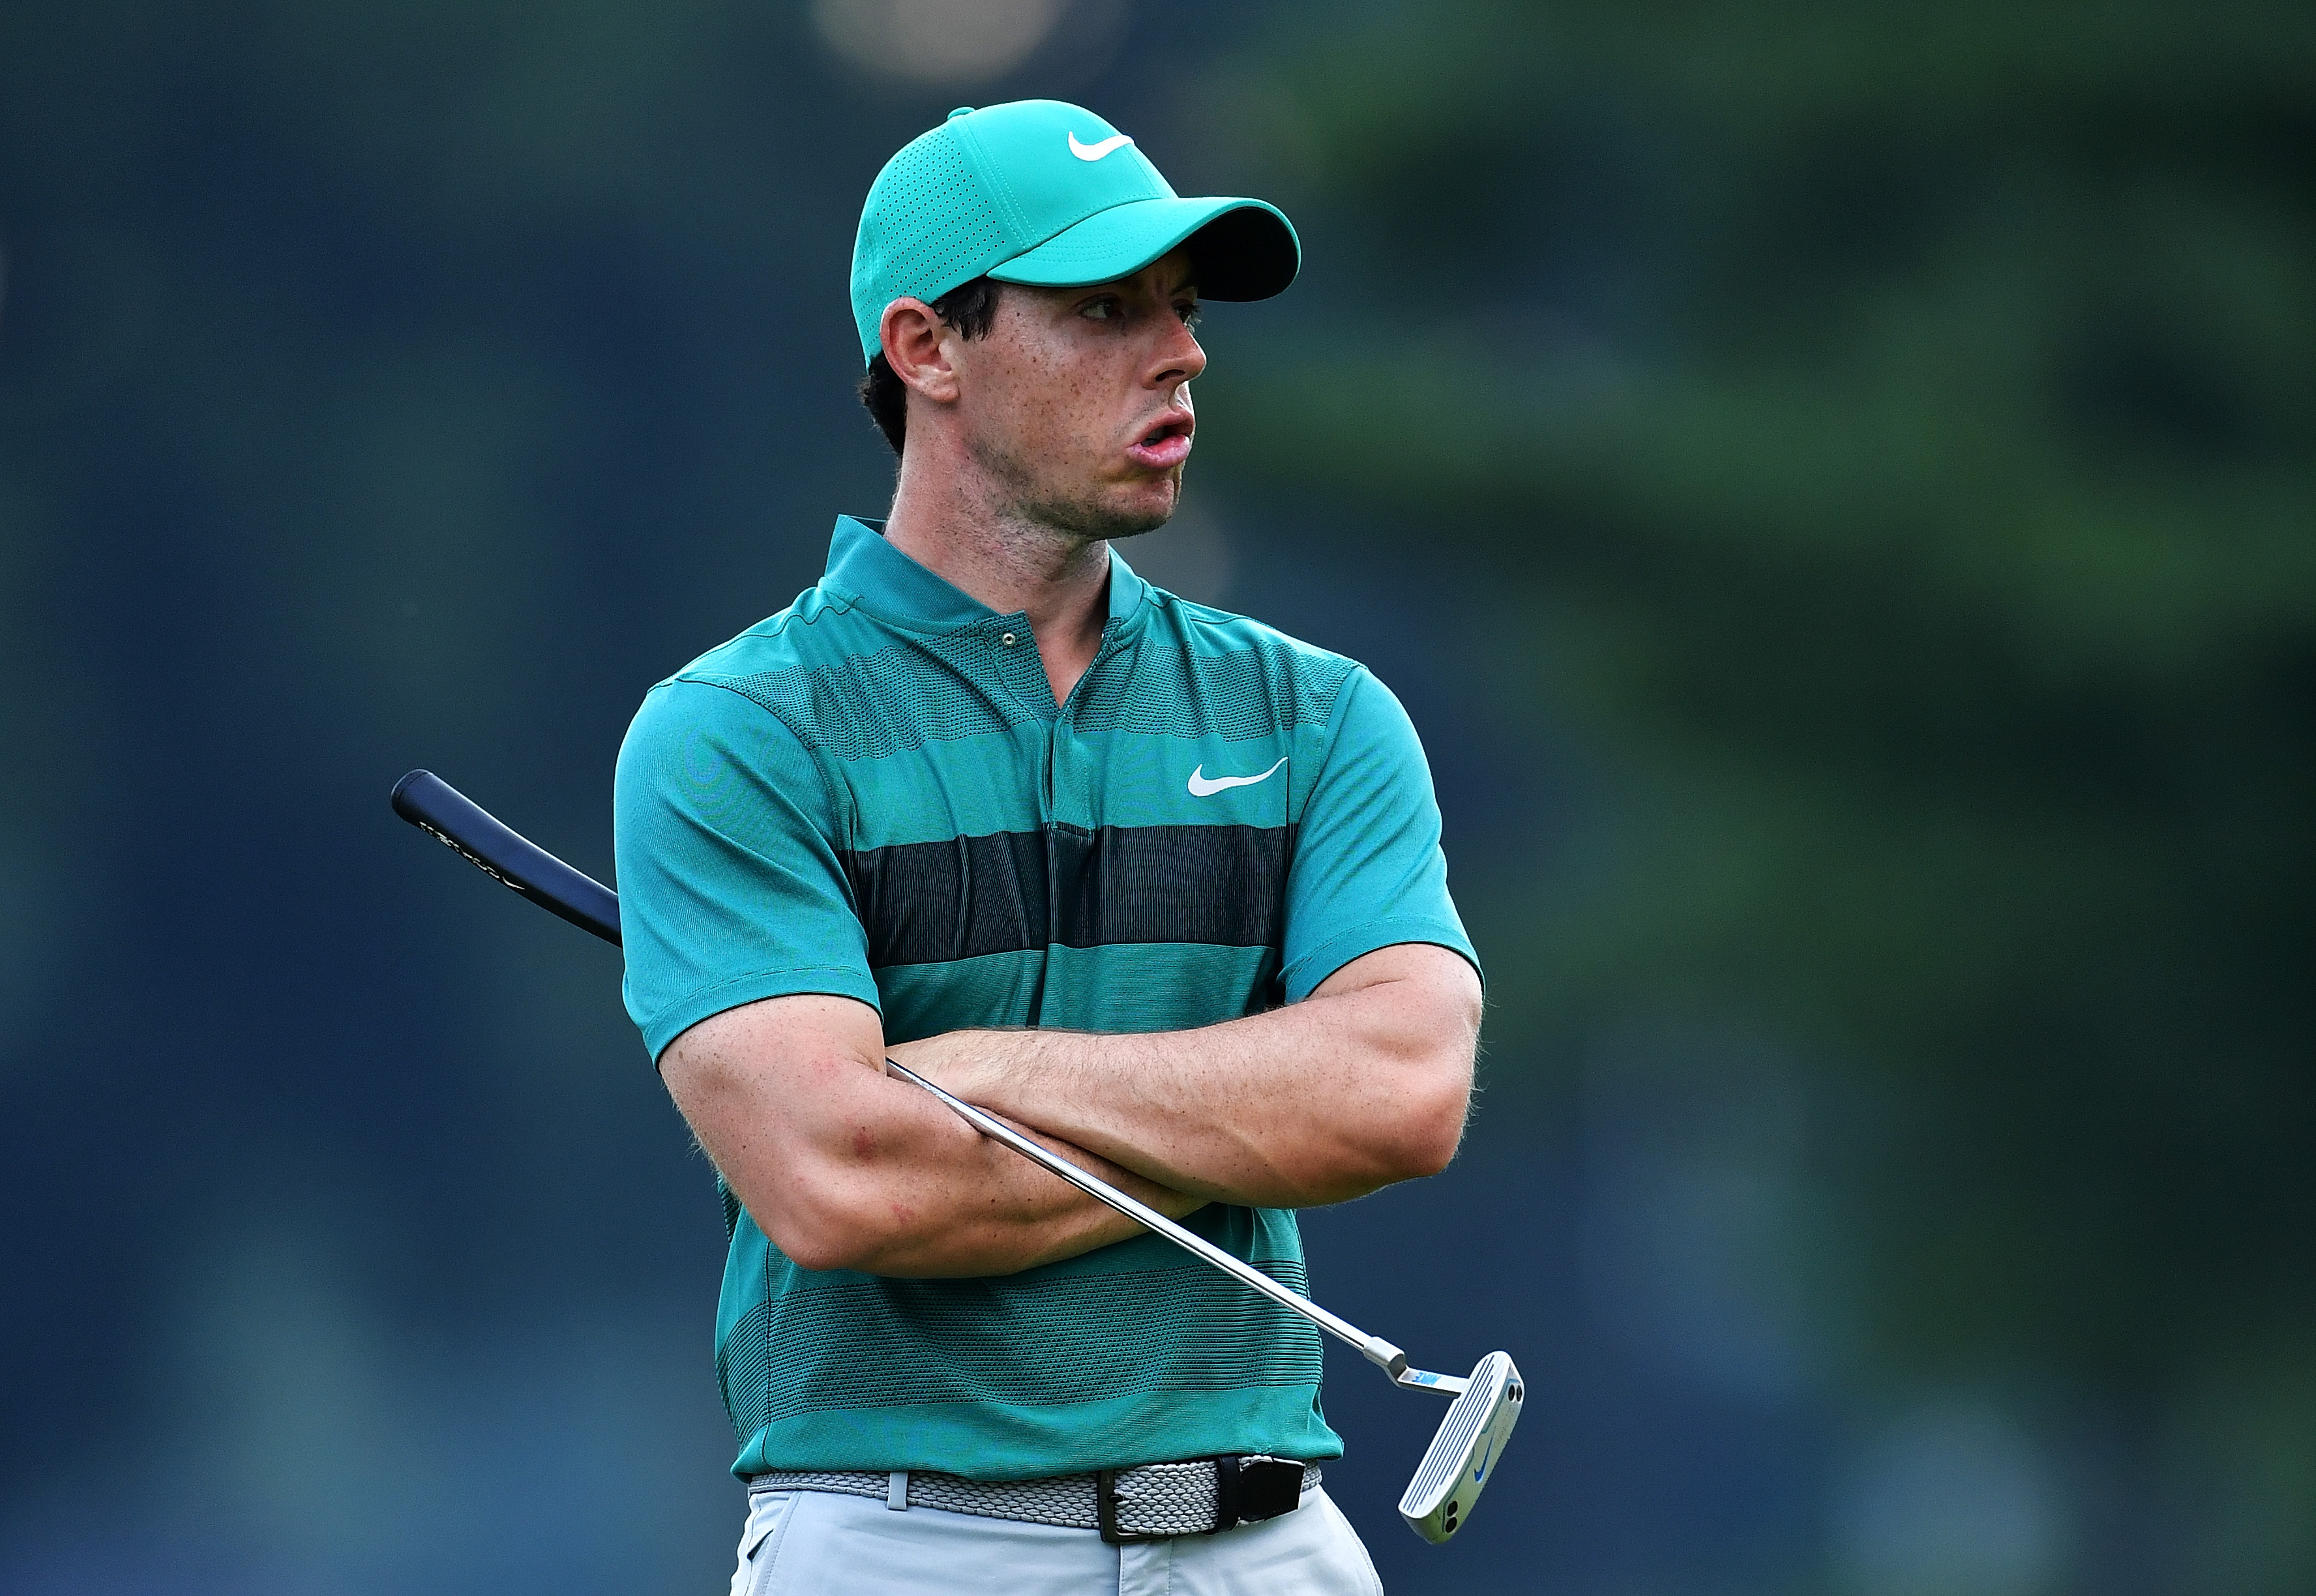 Rory McIlroy confirms he's ditching Nike putter for Scotty Cameron, but likely won't sign new equipment deal anytime | This is Loop | Golf Digest